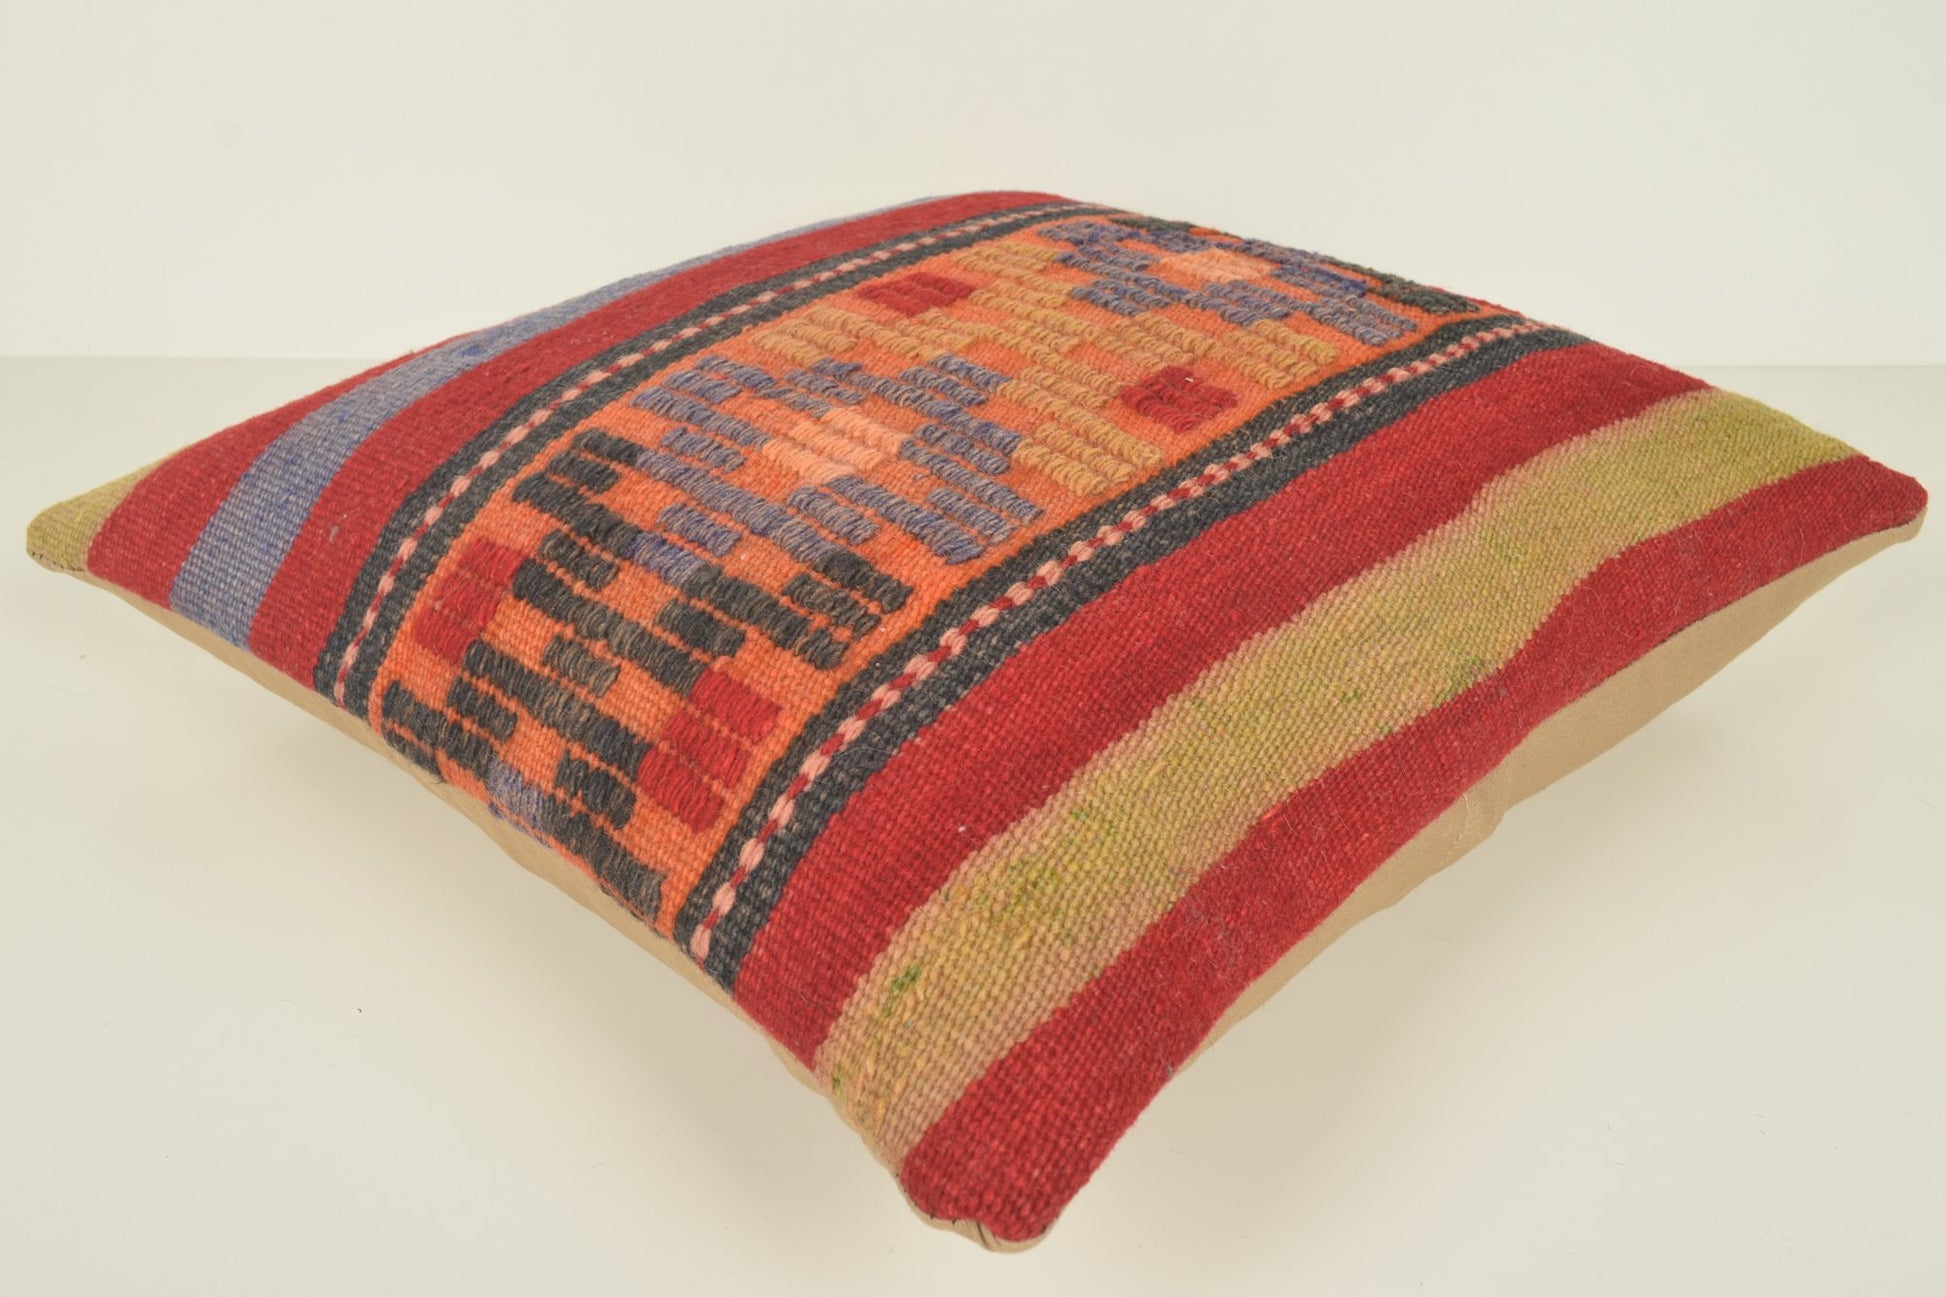 Kilim Bed Pillow C01406 18x18 Lace Northern Woollen